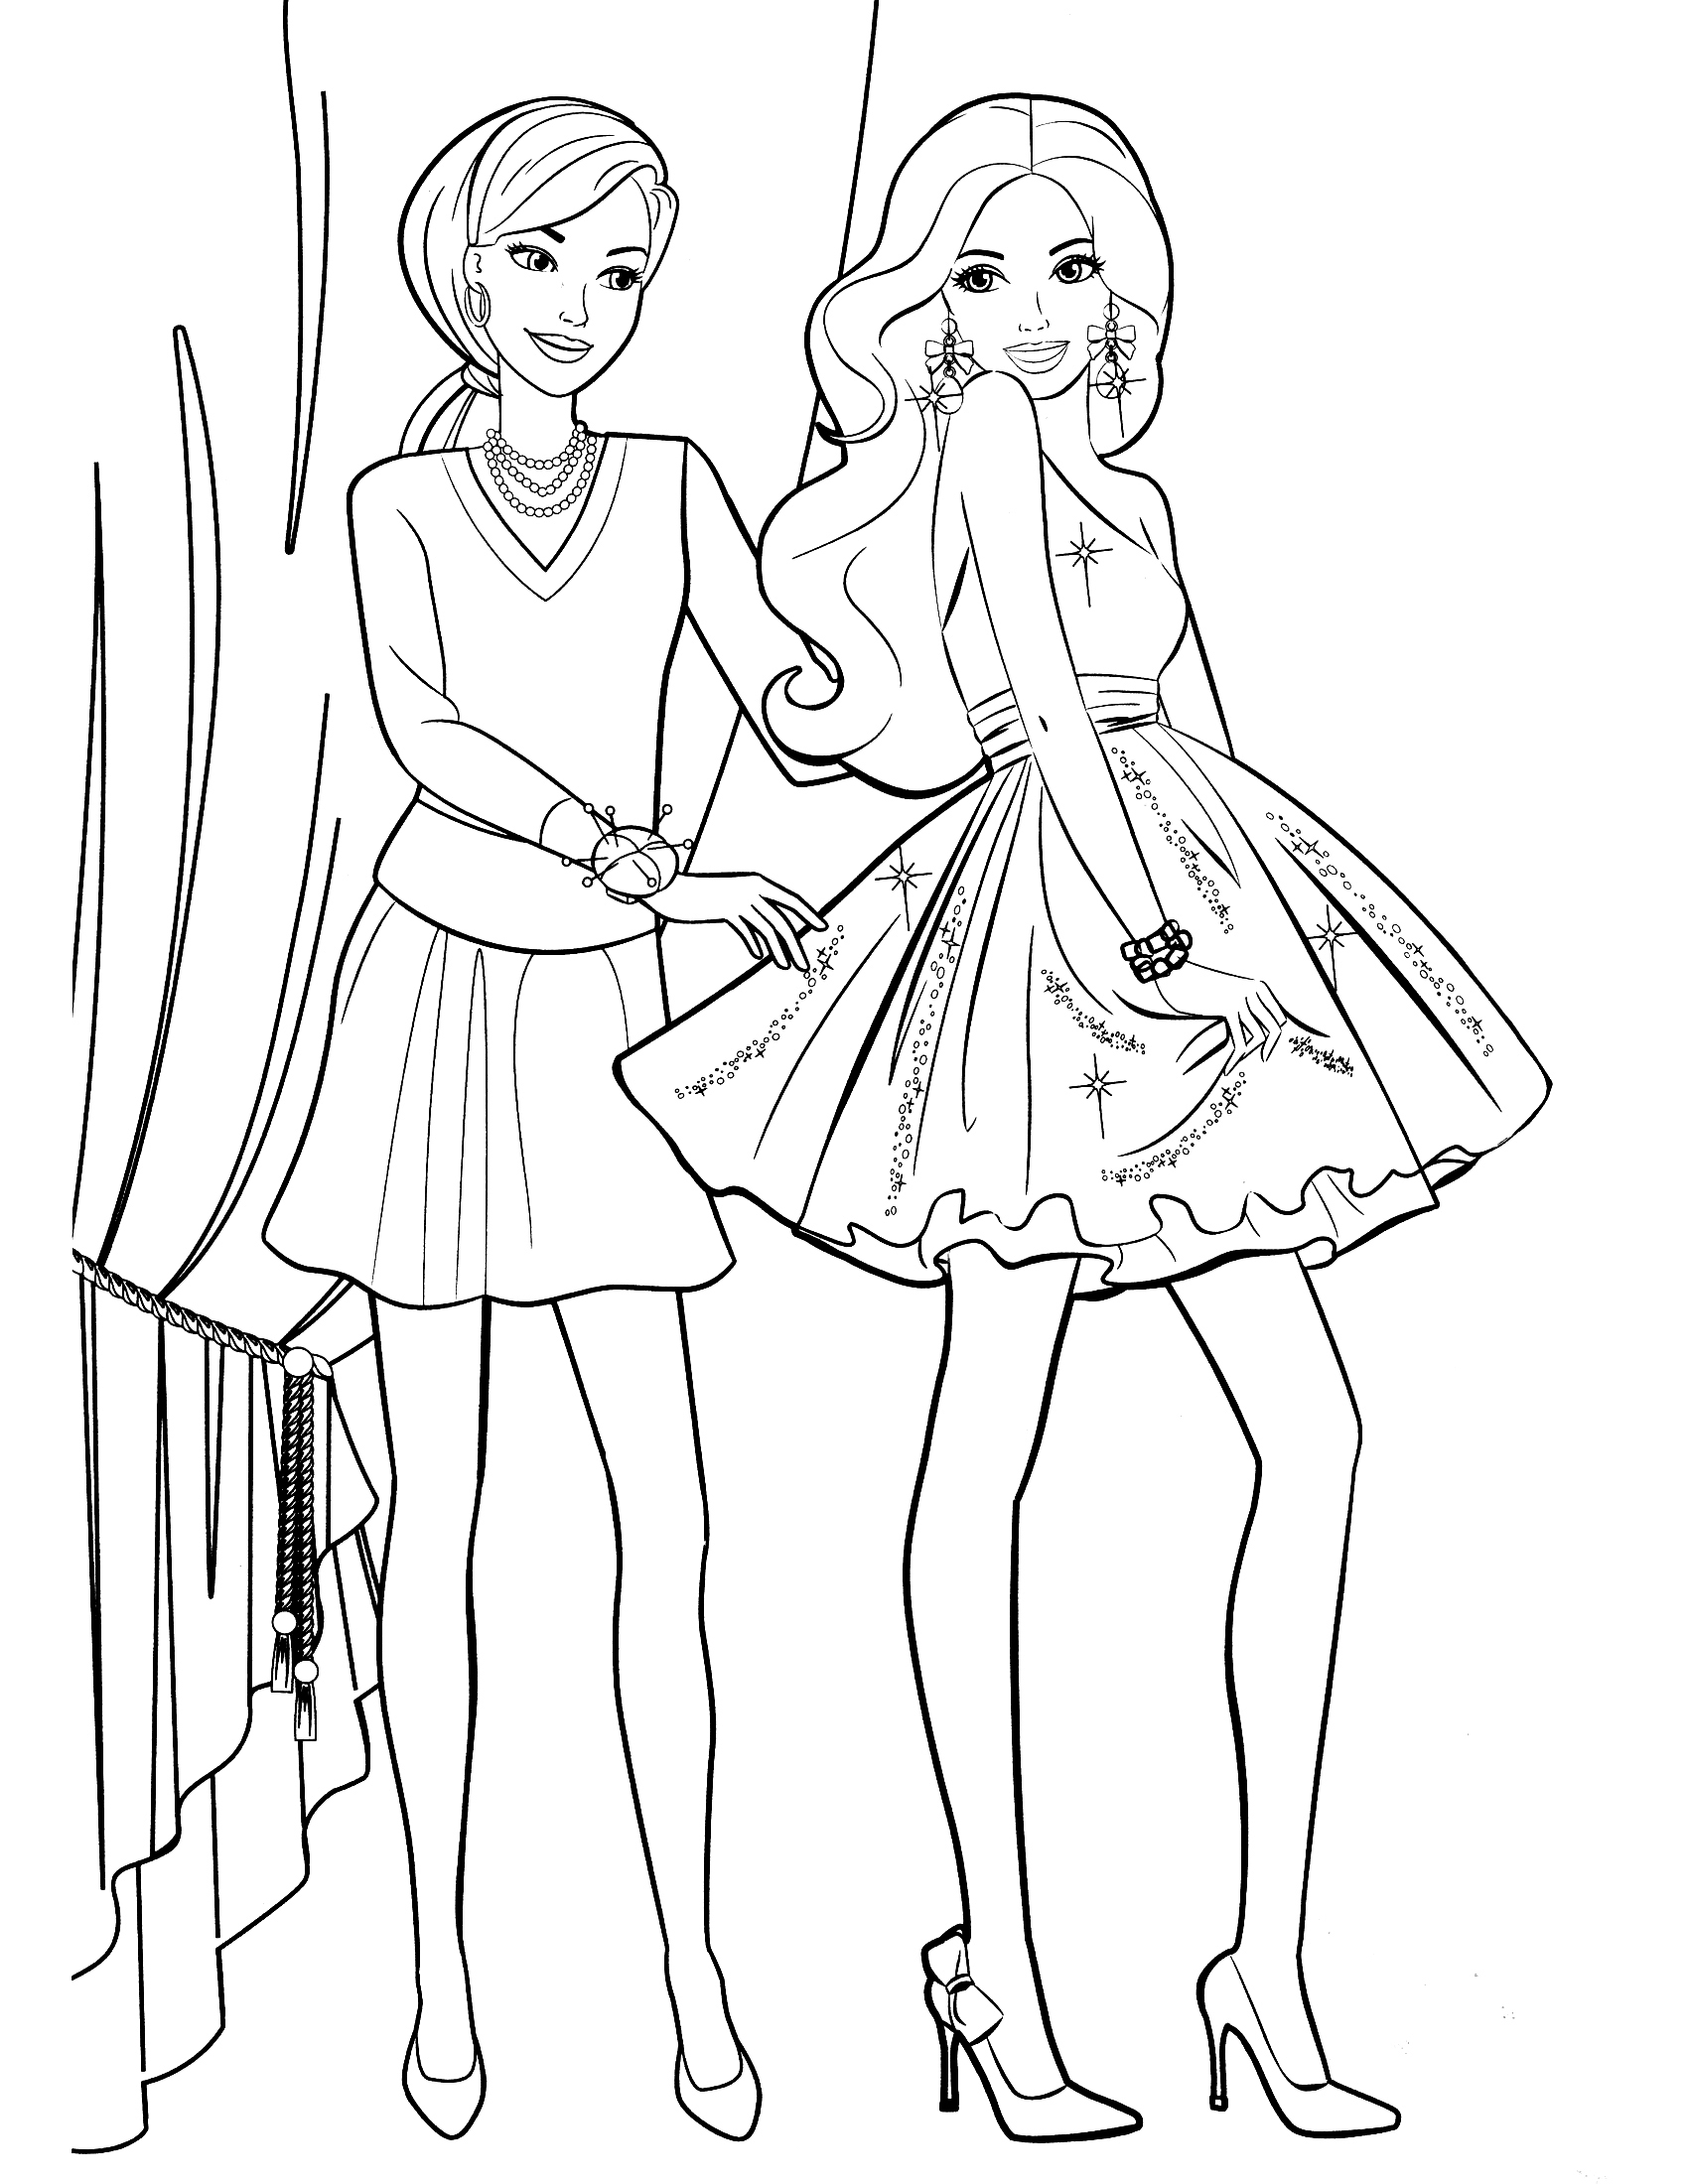 Coloring Pages Of Two Best Friends at GetDrawings | Free download